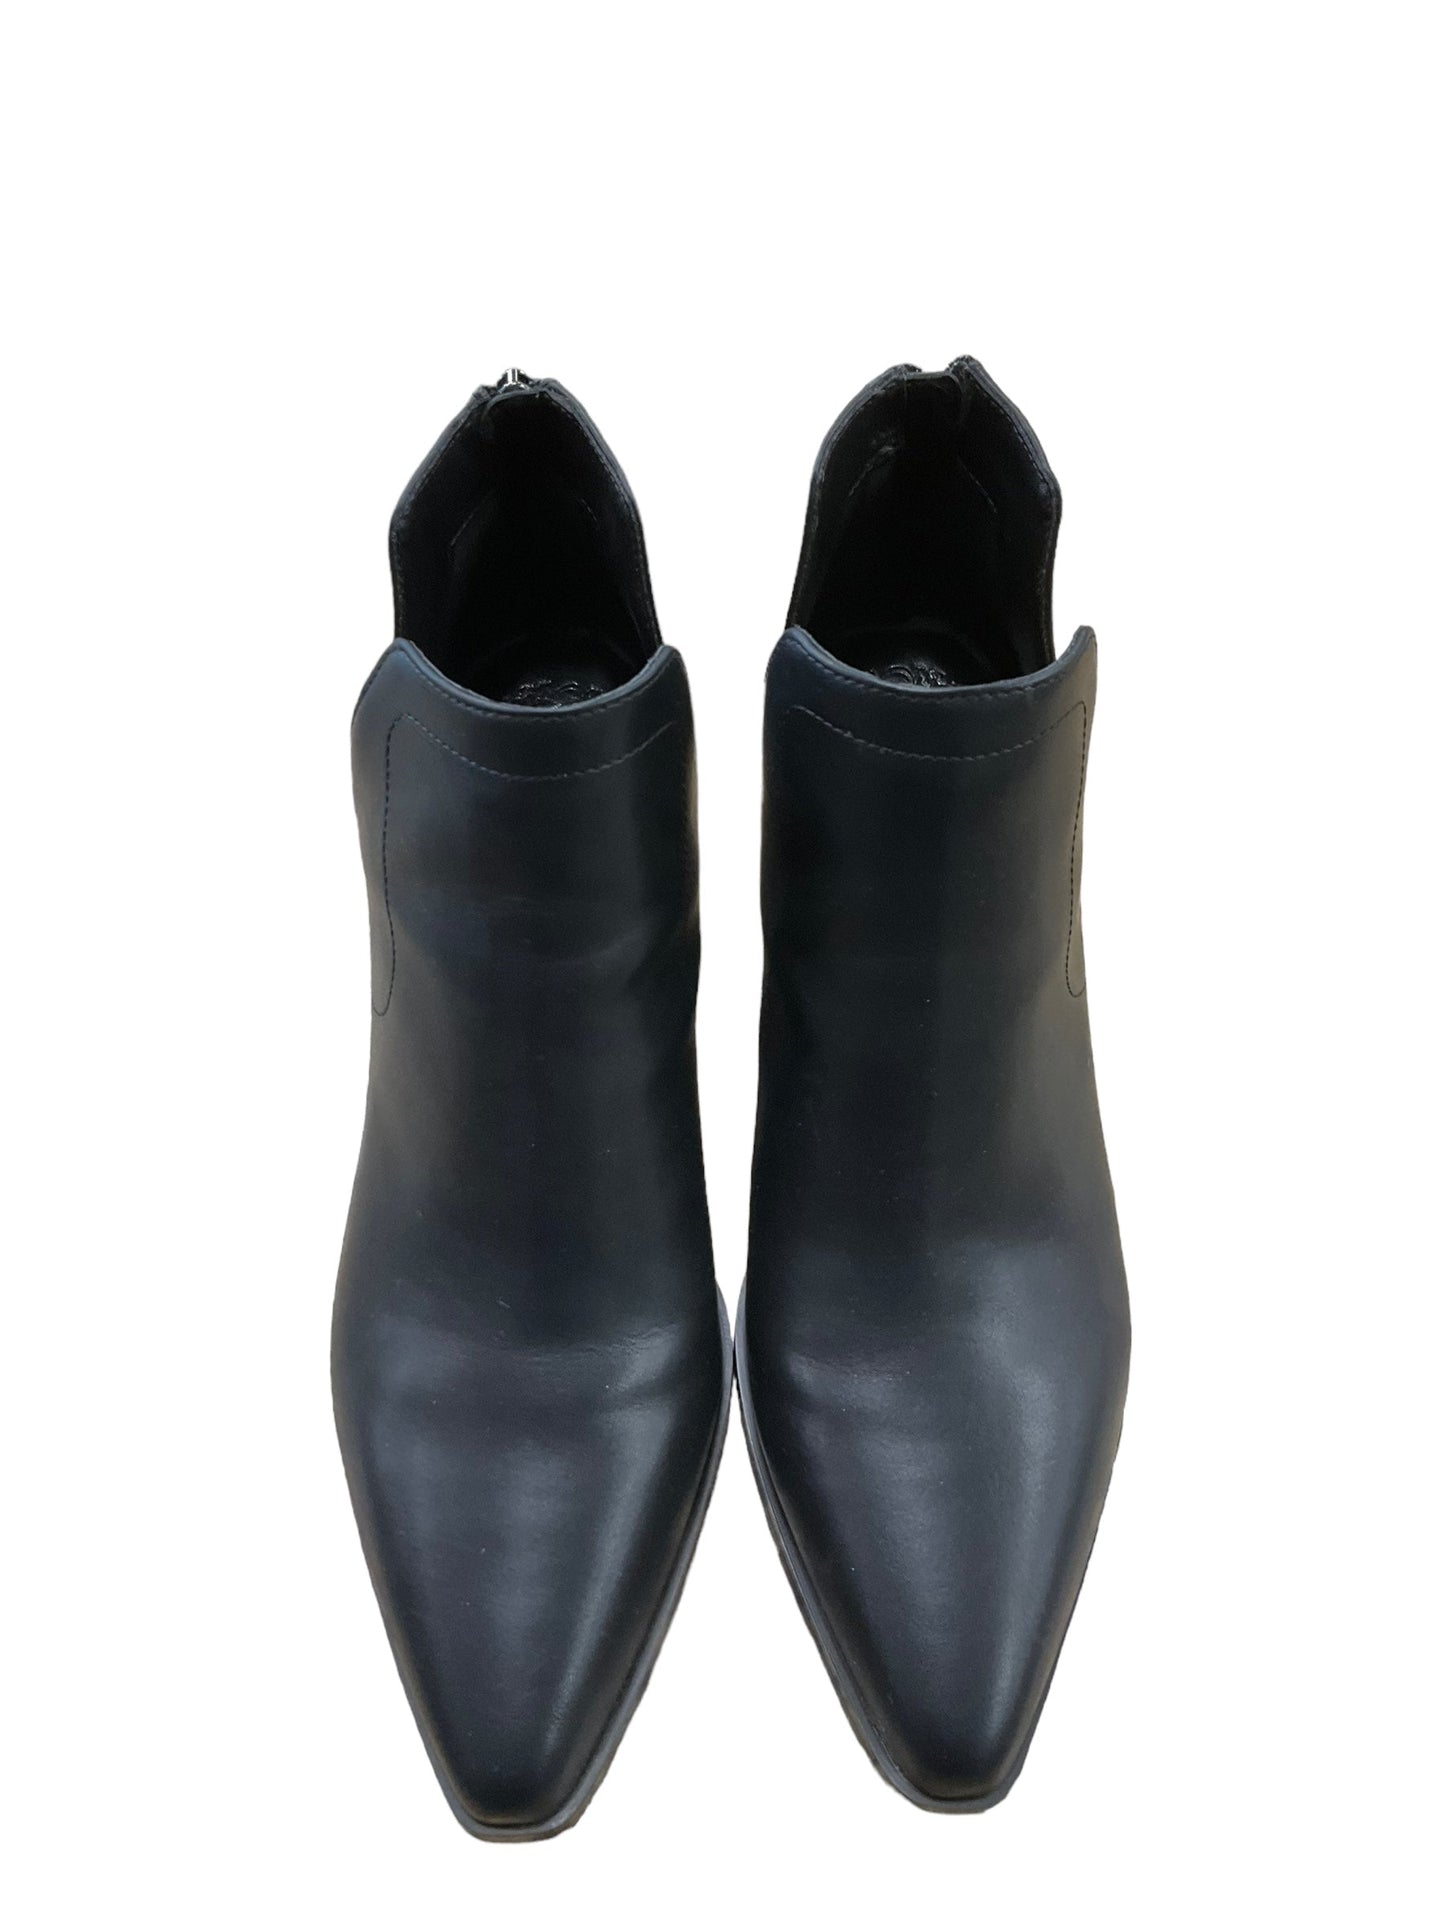 Black Boots Ankle Heels Vince Camuto, Size 10